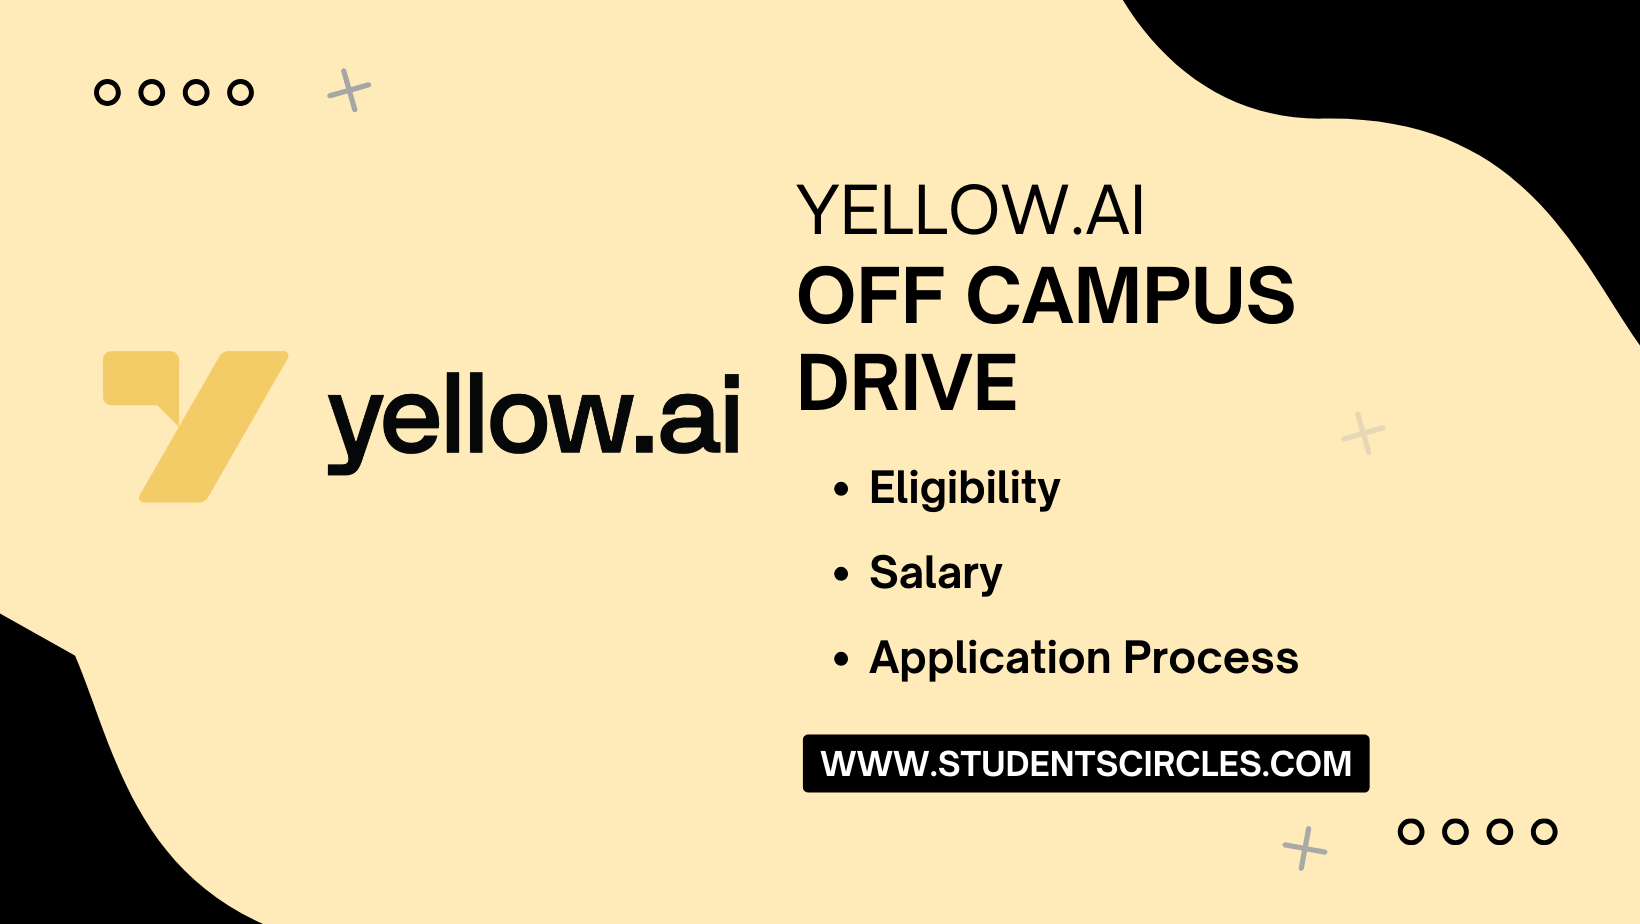 Yellow.ai Off Campus Drive